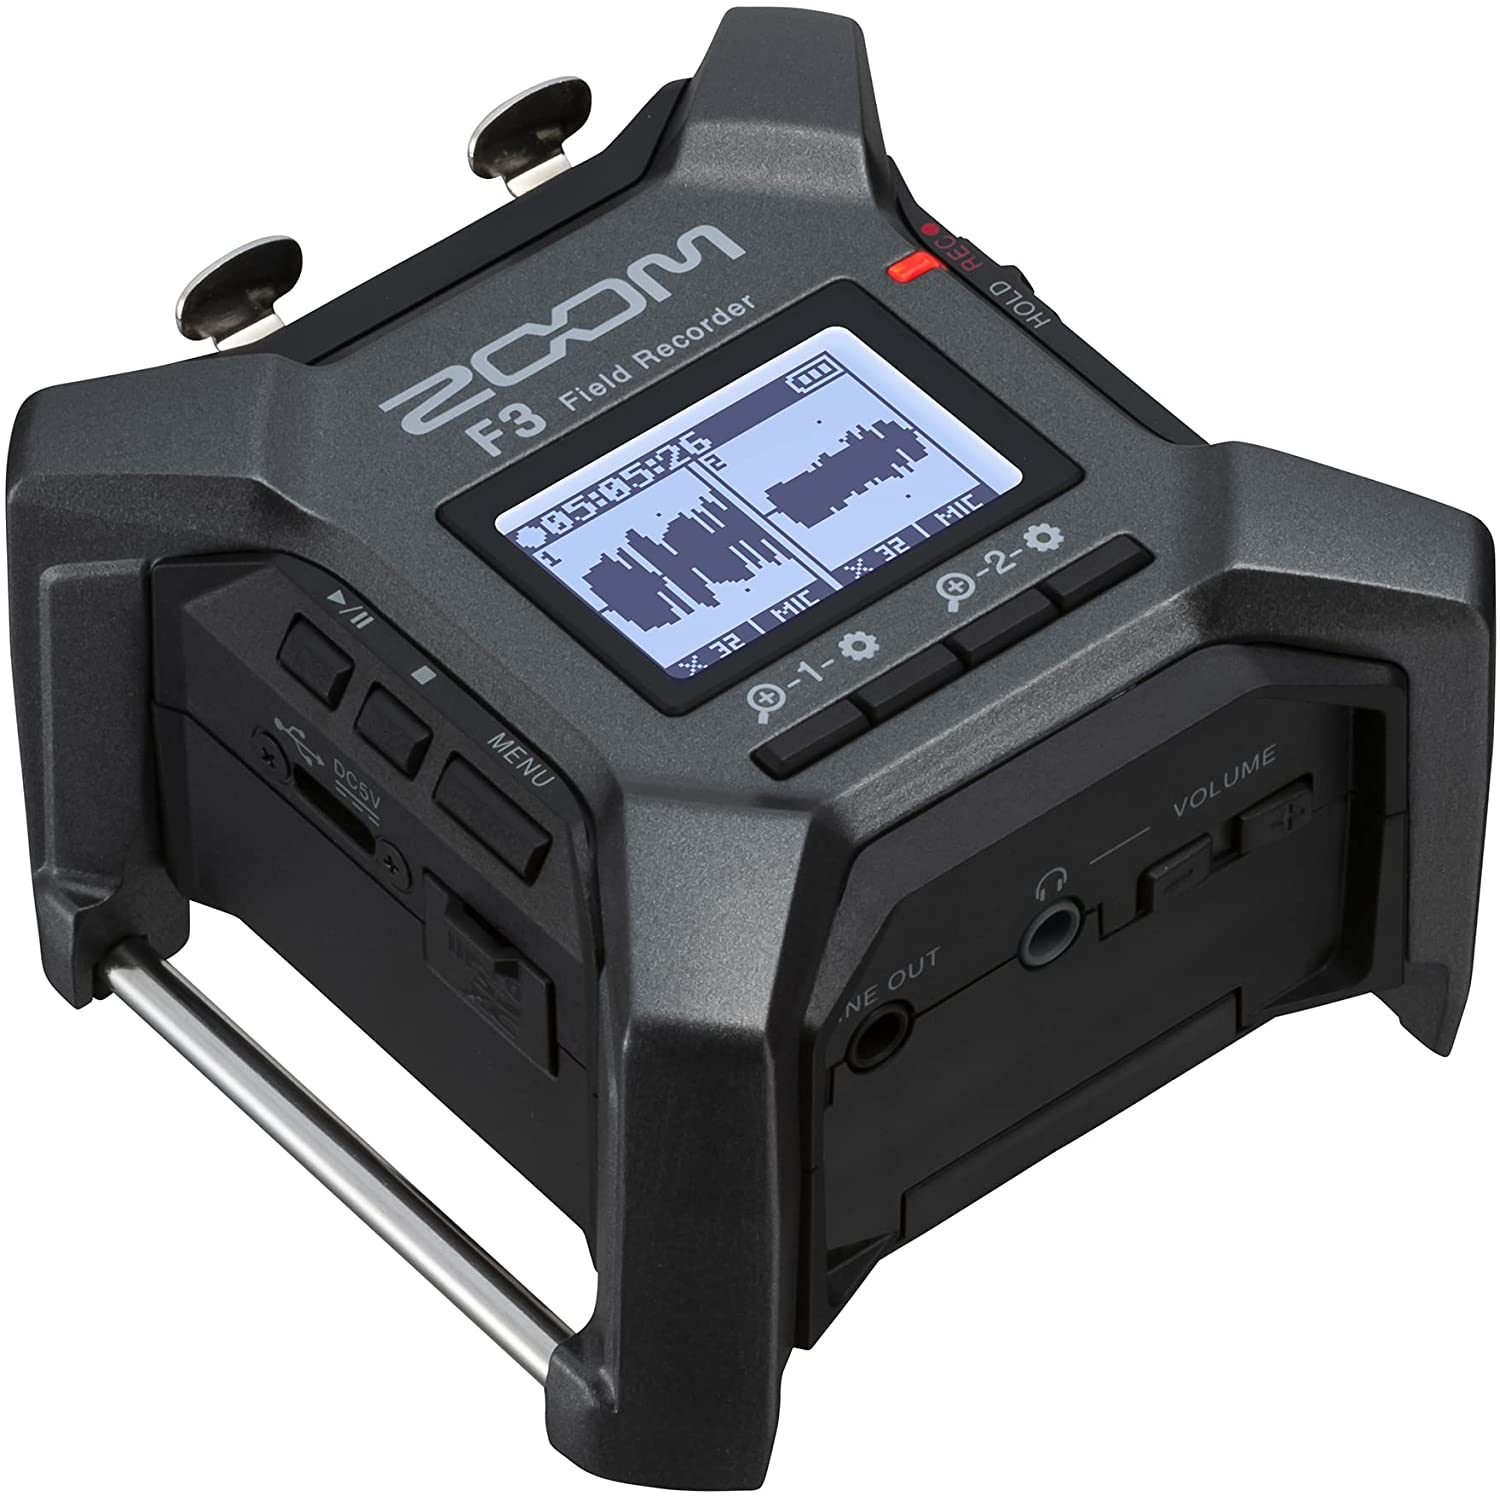 First look: Zoom F3 2-track 32-bit float recorder with 48 kHz sampling rate 16